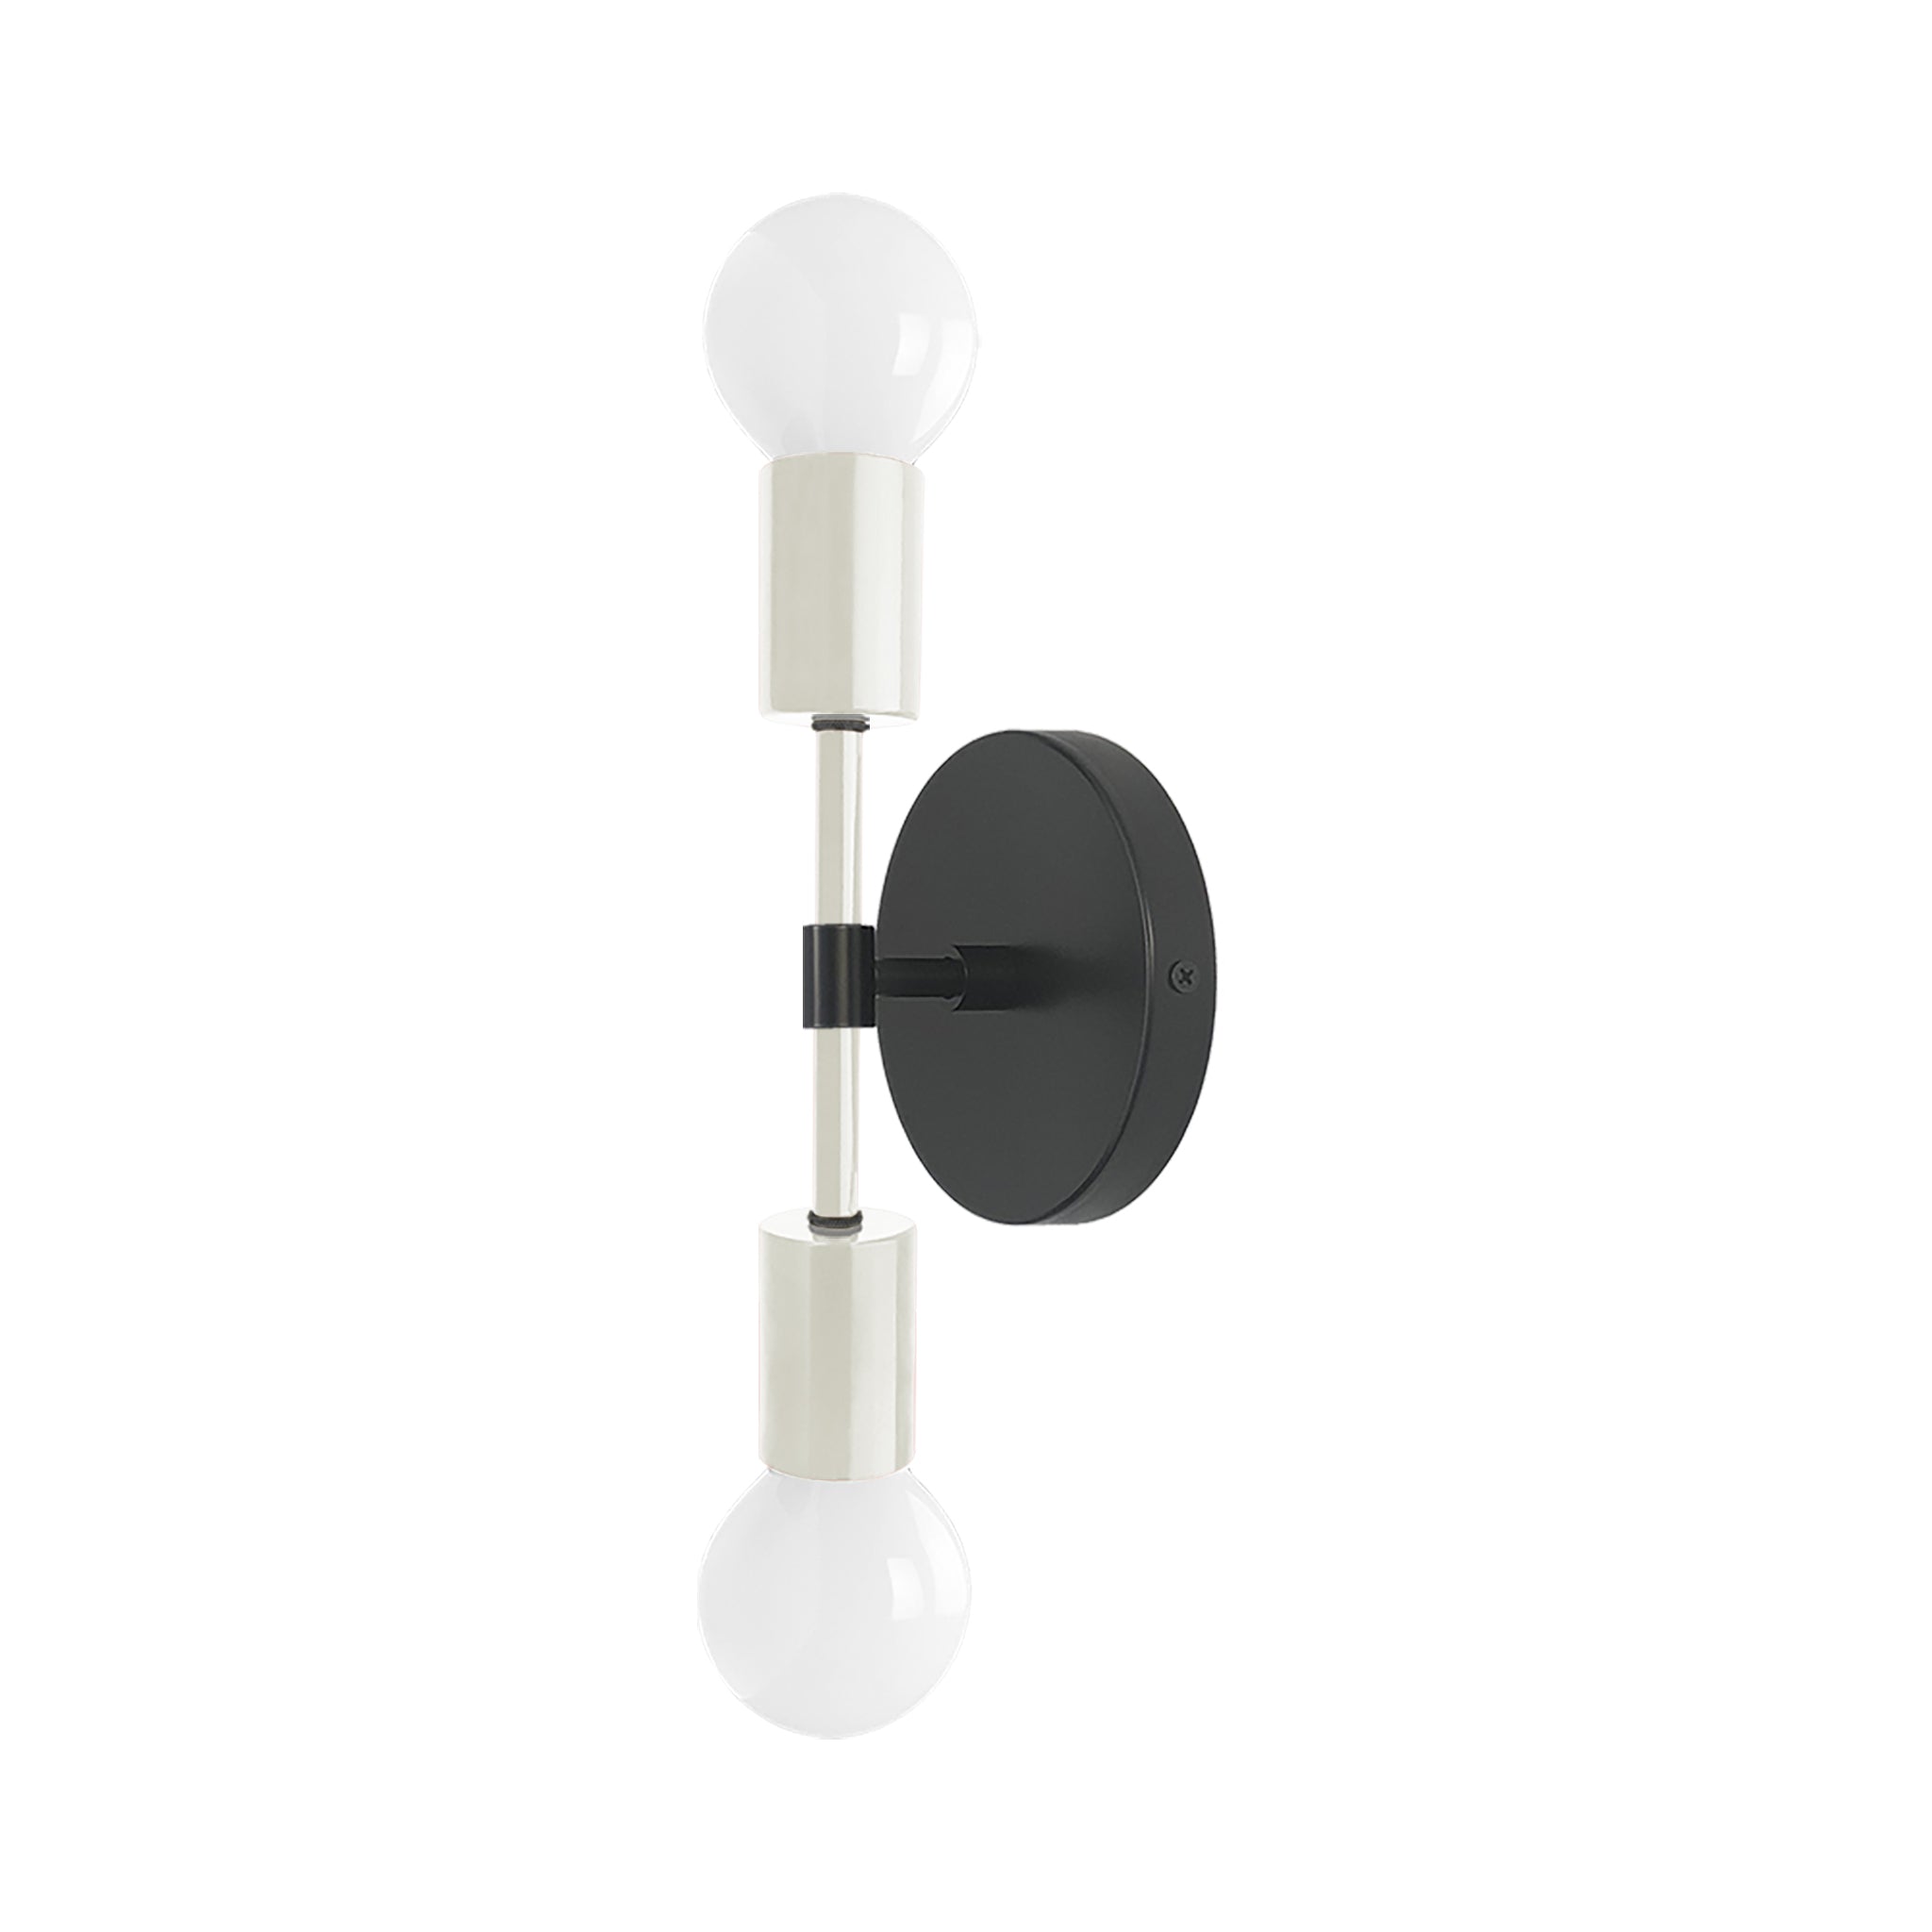 Black and spa color Scepter sconce 10" Dutton Brown lighting